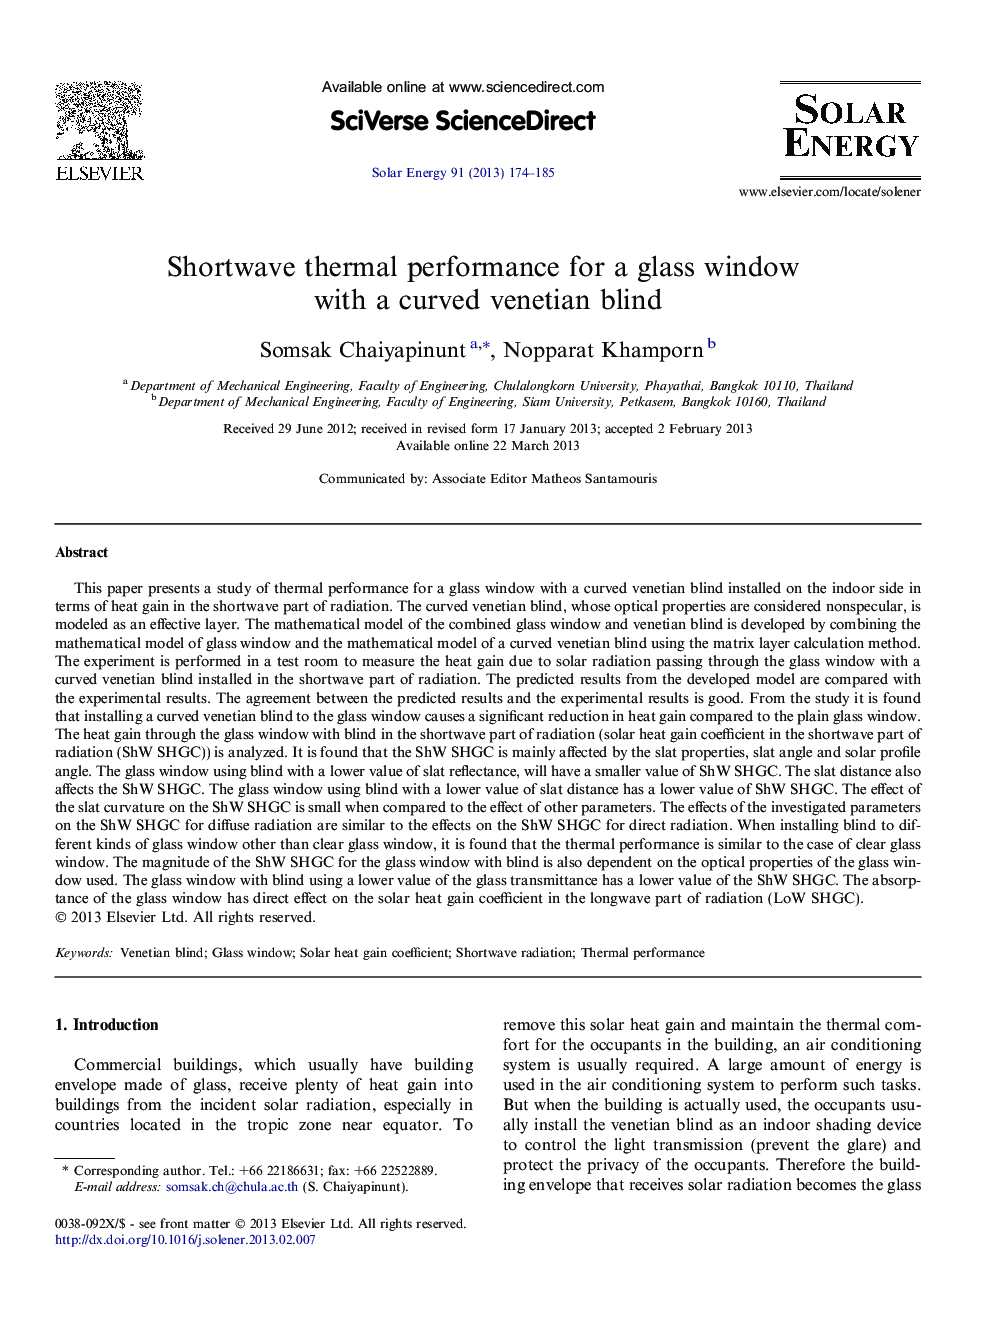 Shortwave thermal performance for a glass window with a curved venetian blind